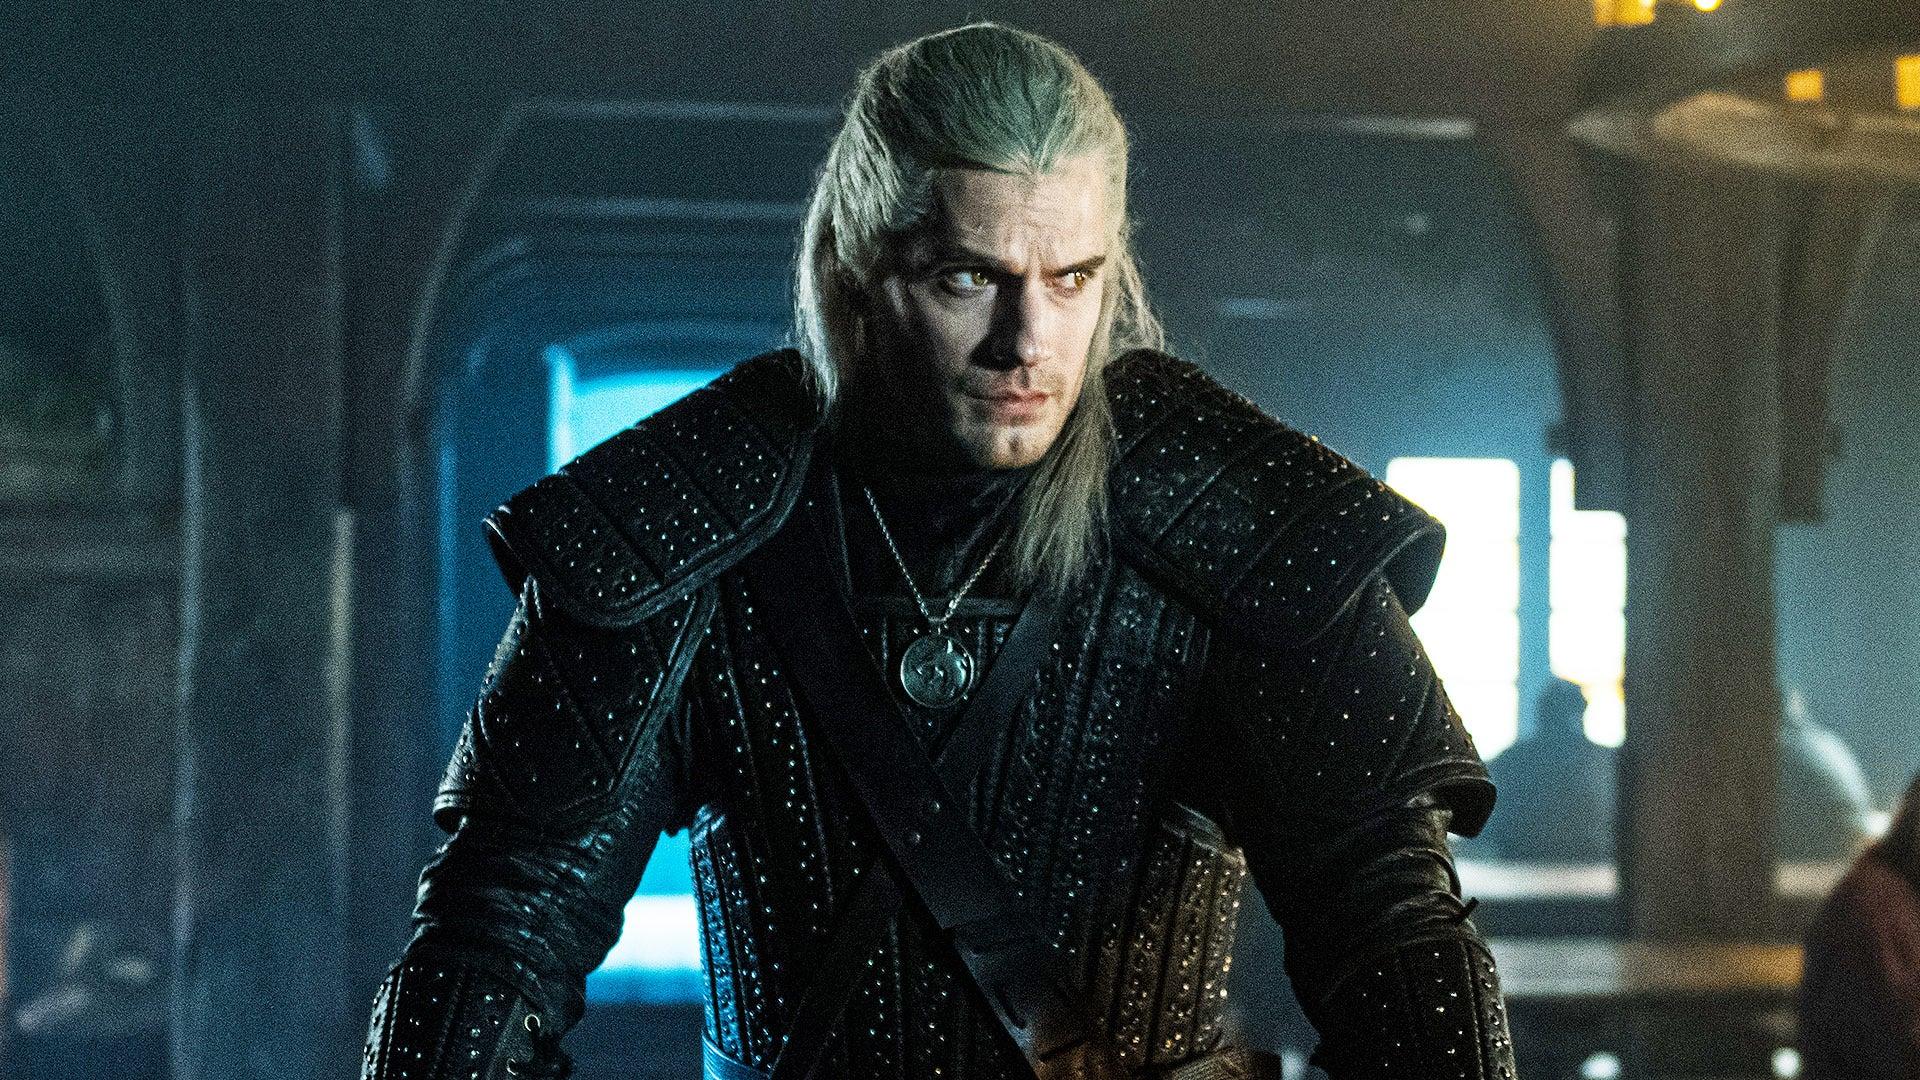 Netflix releases official Witcher timeline, revealing season 1